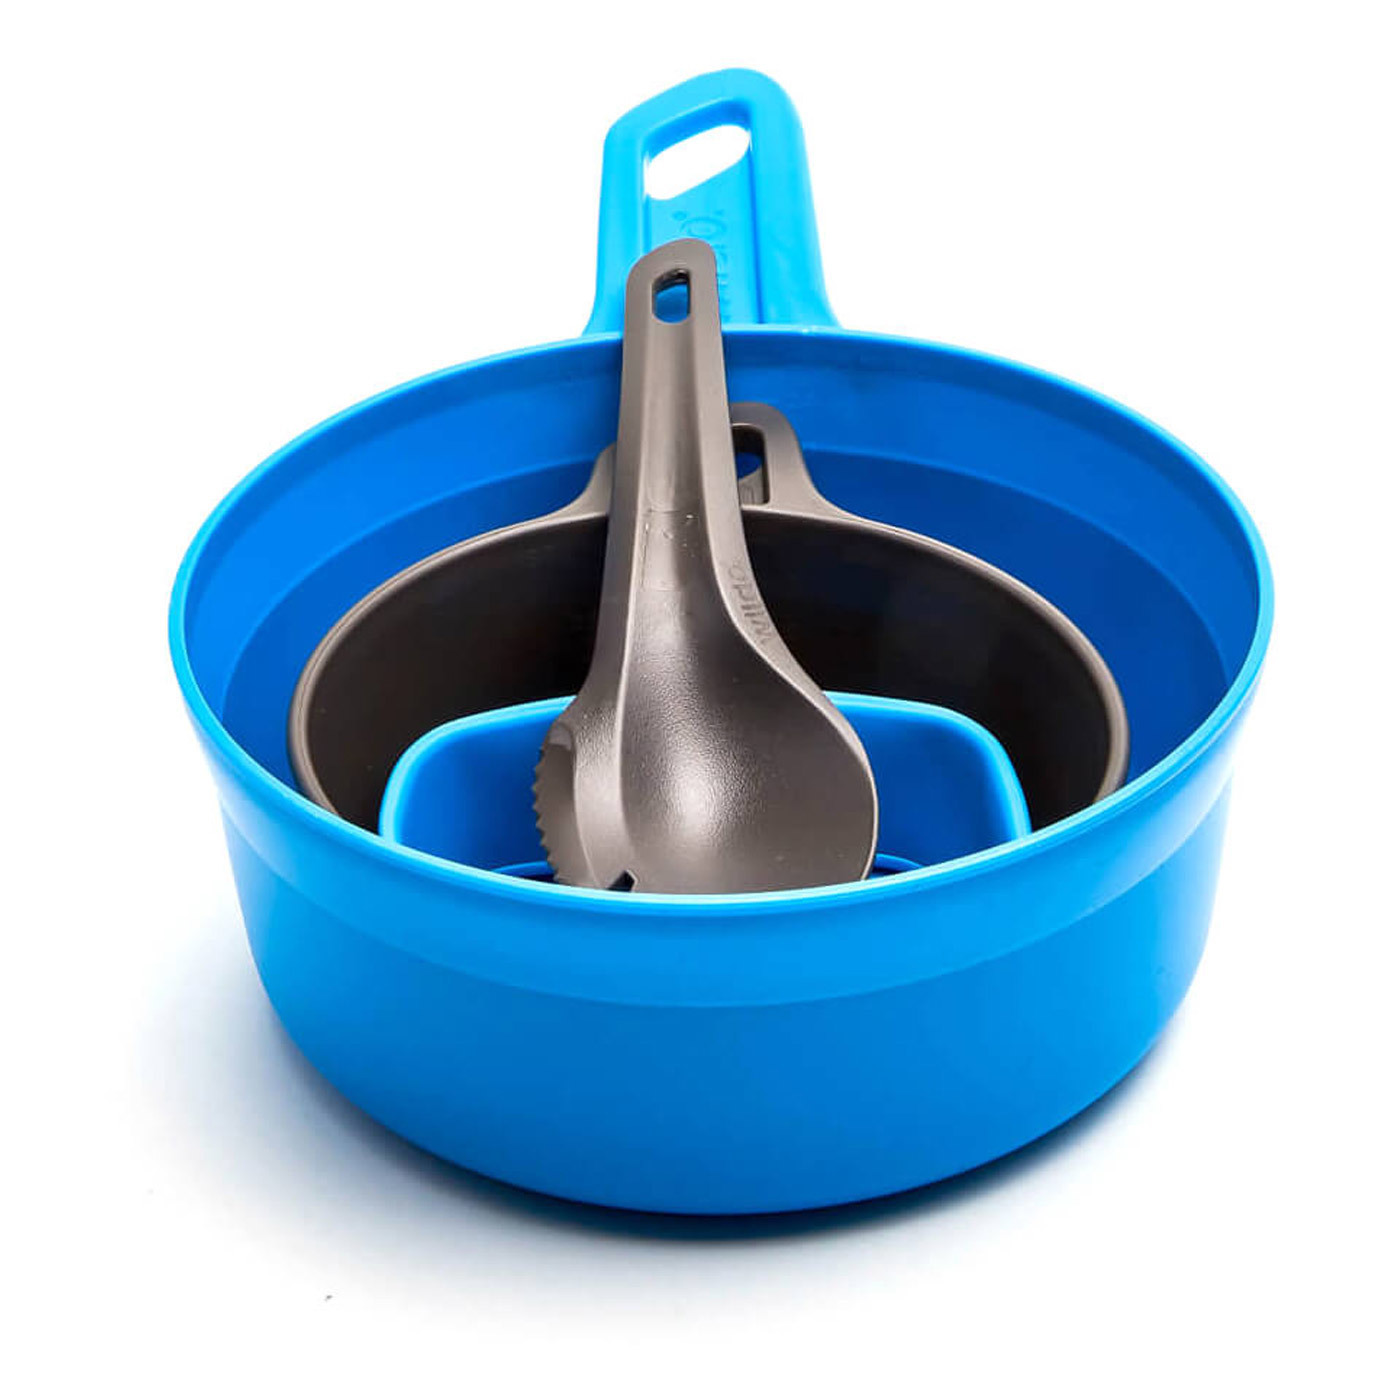 Wildo Outdoor Camping Fold-A-Cup Kit Blue Spork /& Small//Big Cup